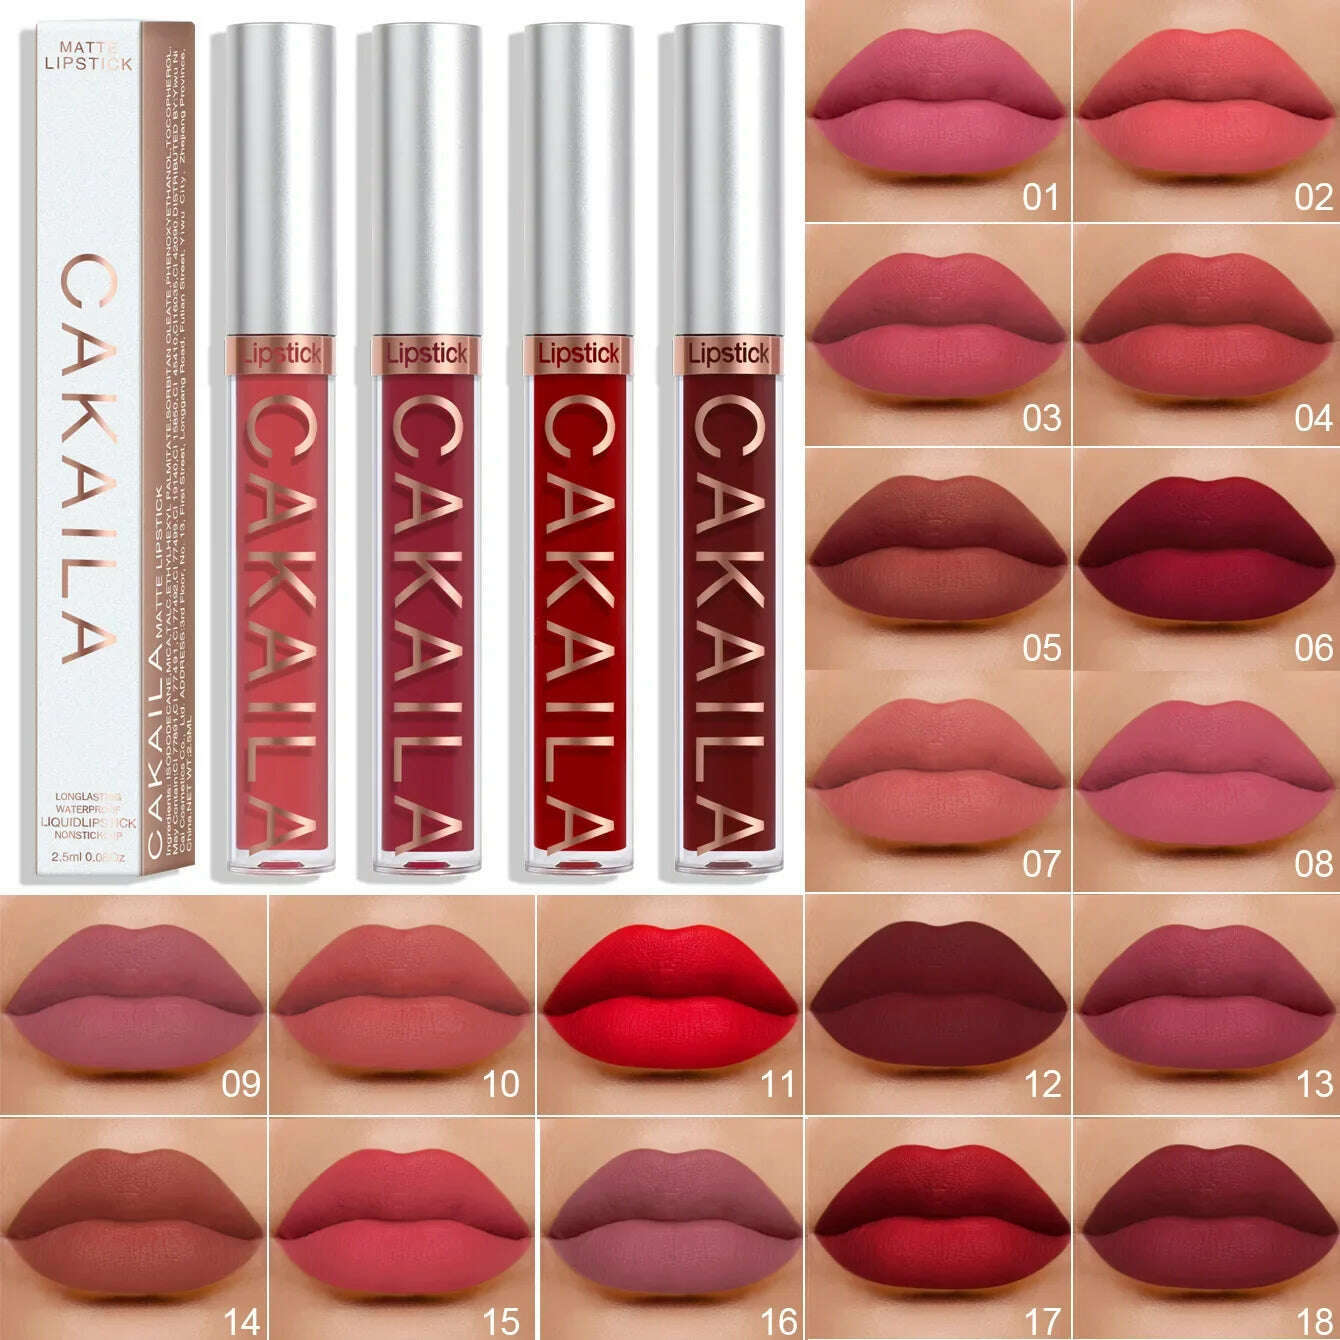 KIMLUD, 18 Colors Long Lasting Matte Nude Liquid Lipstick Waterproof Non-stick Cup Sexy Nude Red Brown Lip Gloss Lips Makeup Cosmetics, KIMLUD Women's Clothes